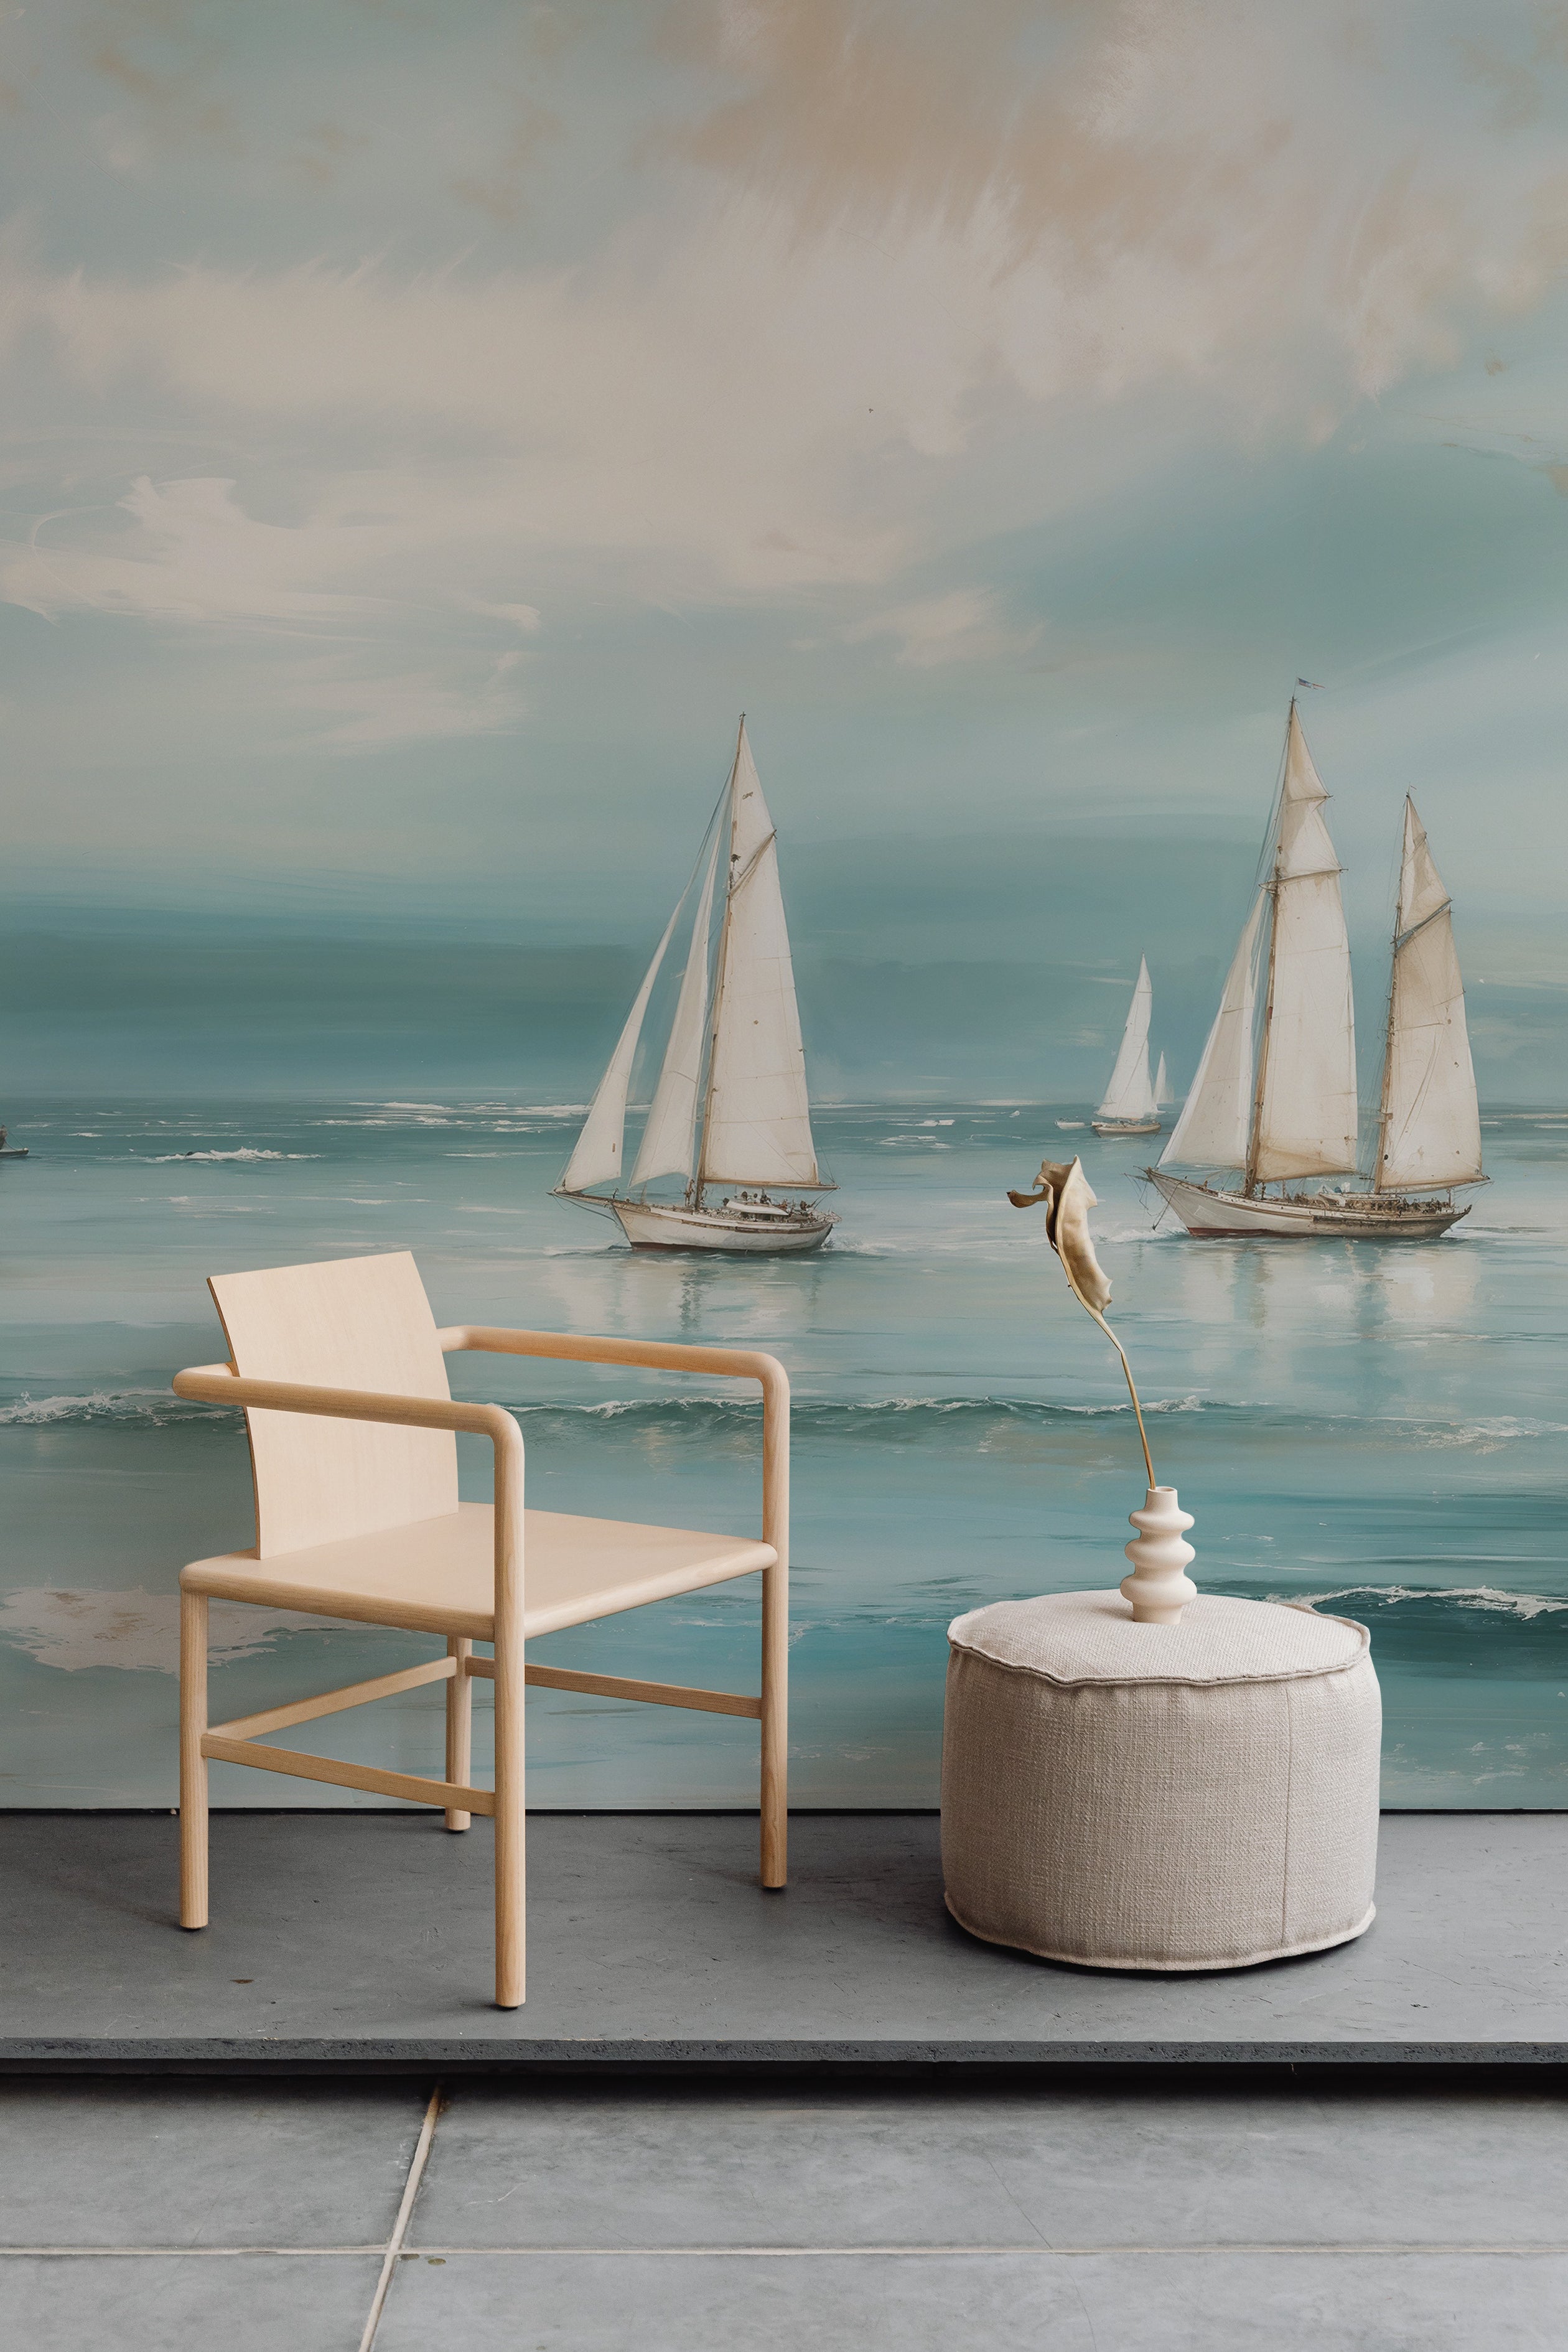 A serene and stylish room with a Seaside Wallpaper Mural depicting a beautiful ocean scene with sailboats. The mural creates a tranquil backdrop to a minimalistic seating area featuring a light wooden chair, a circular ottoman, and a delicate sculptural ornament.